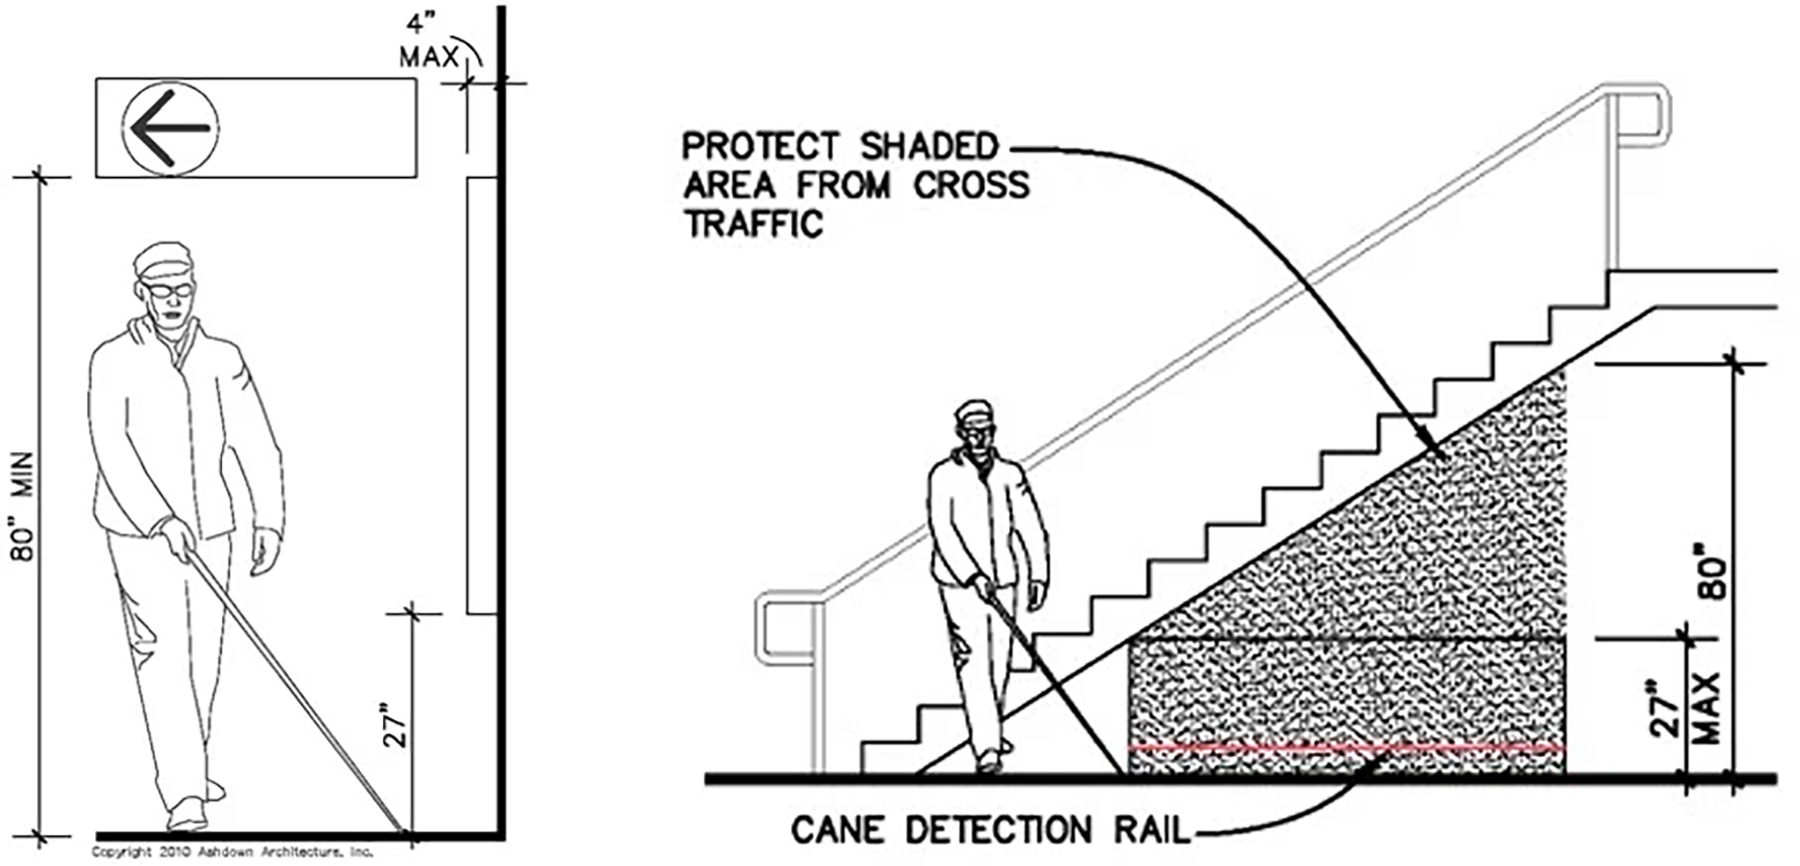 Diagram of blind man walking with cane